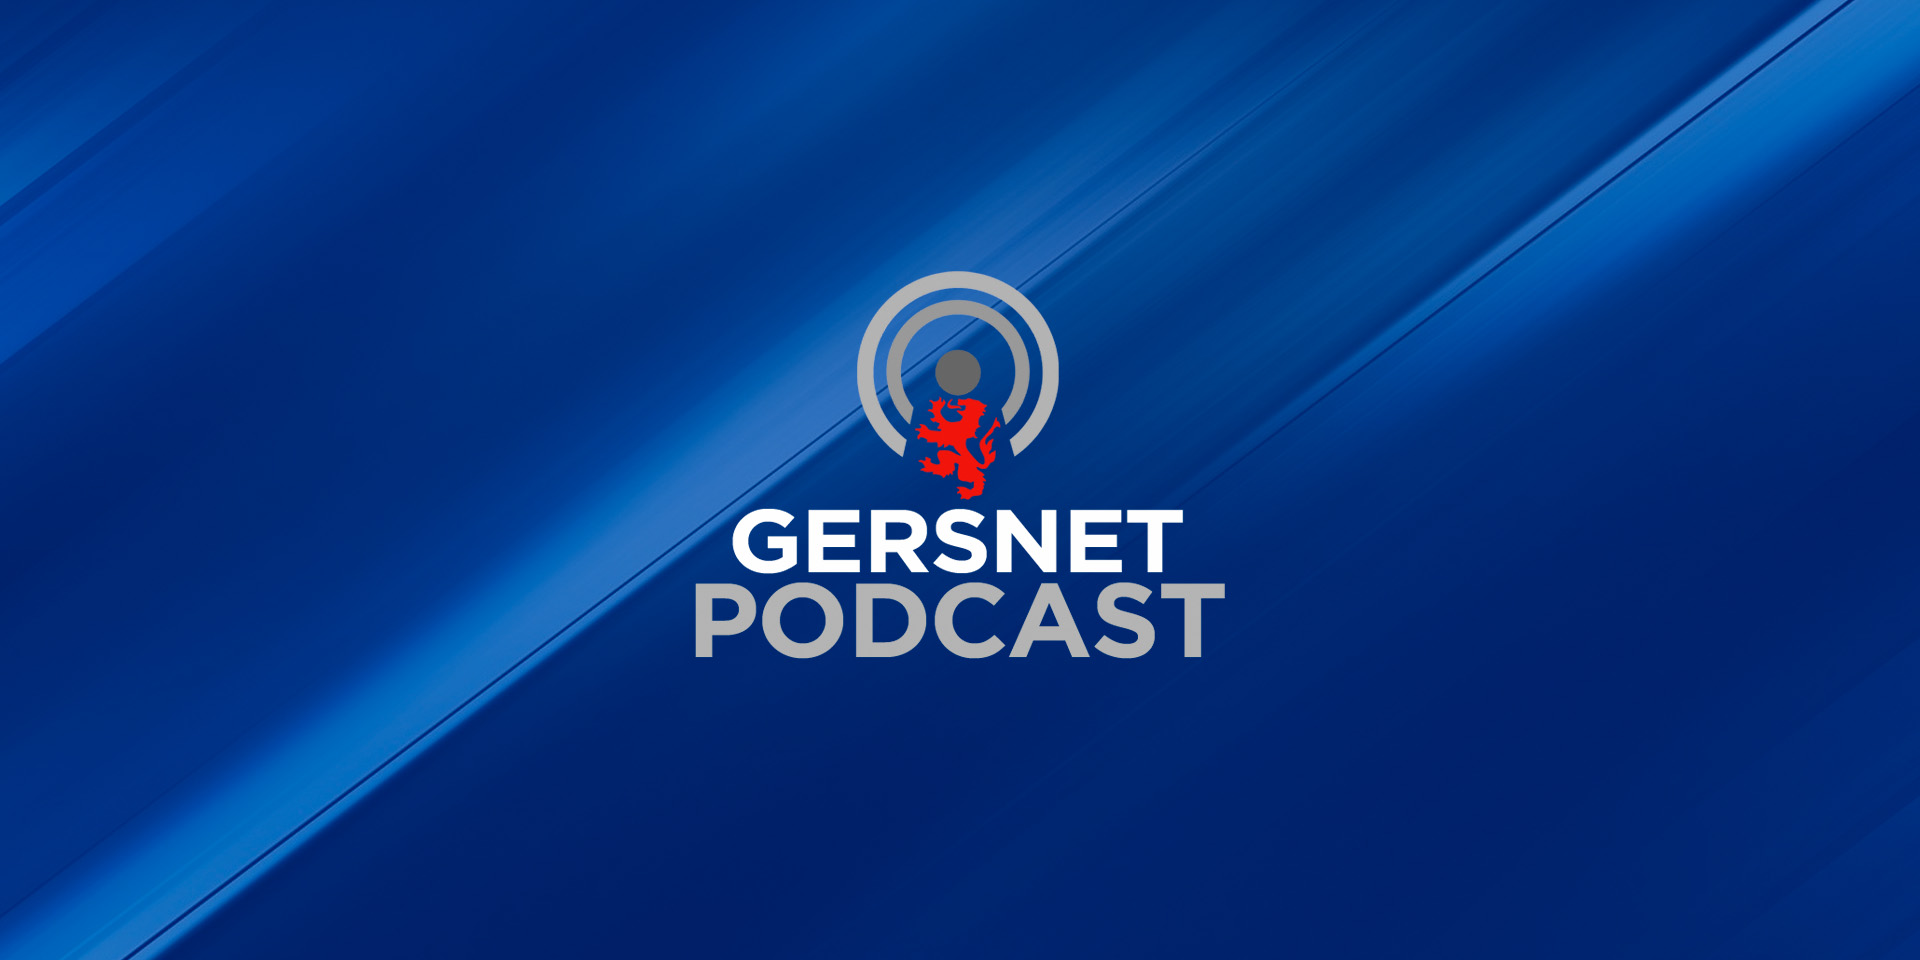 Gersnet Podcast 243 - Partick Thistle Preview